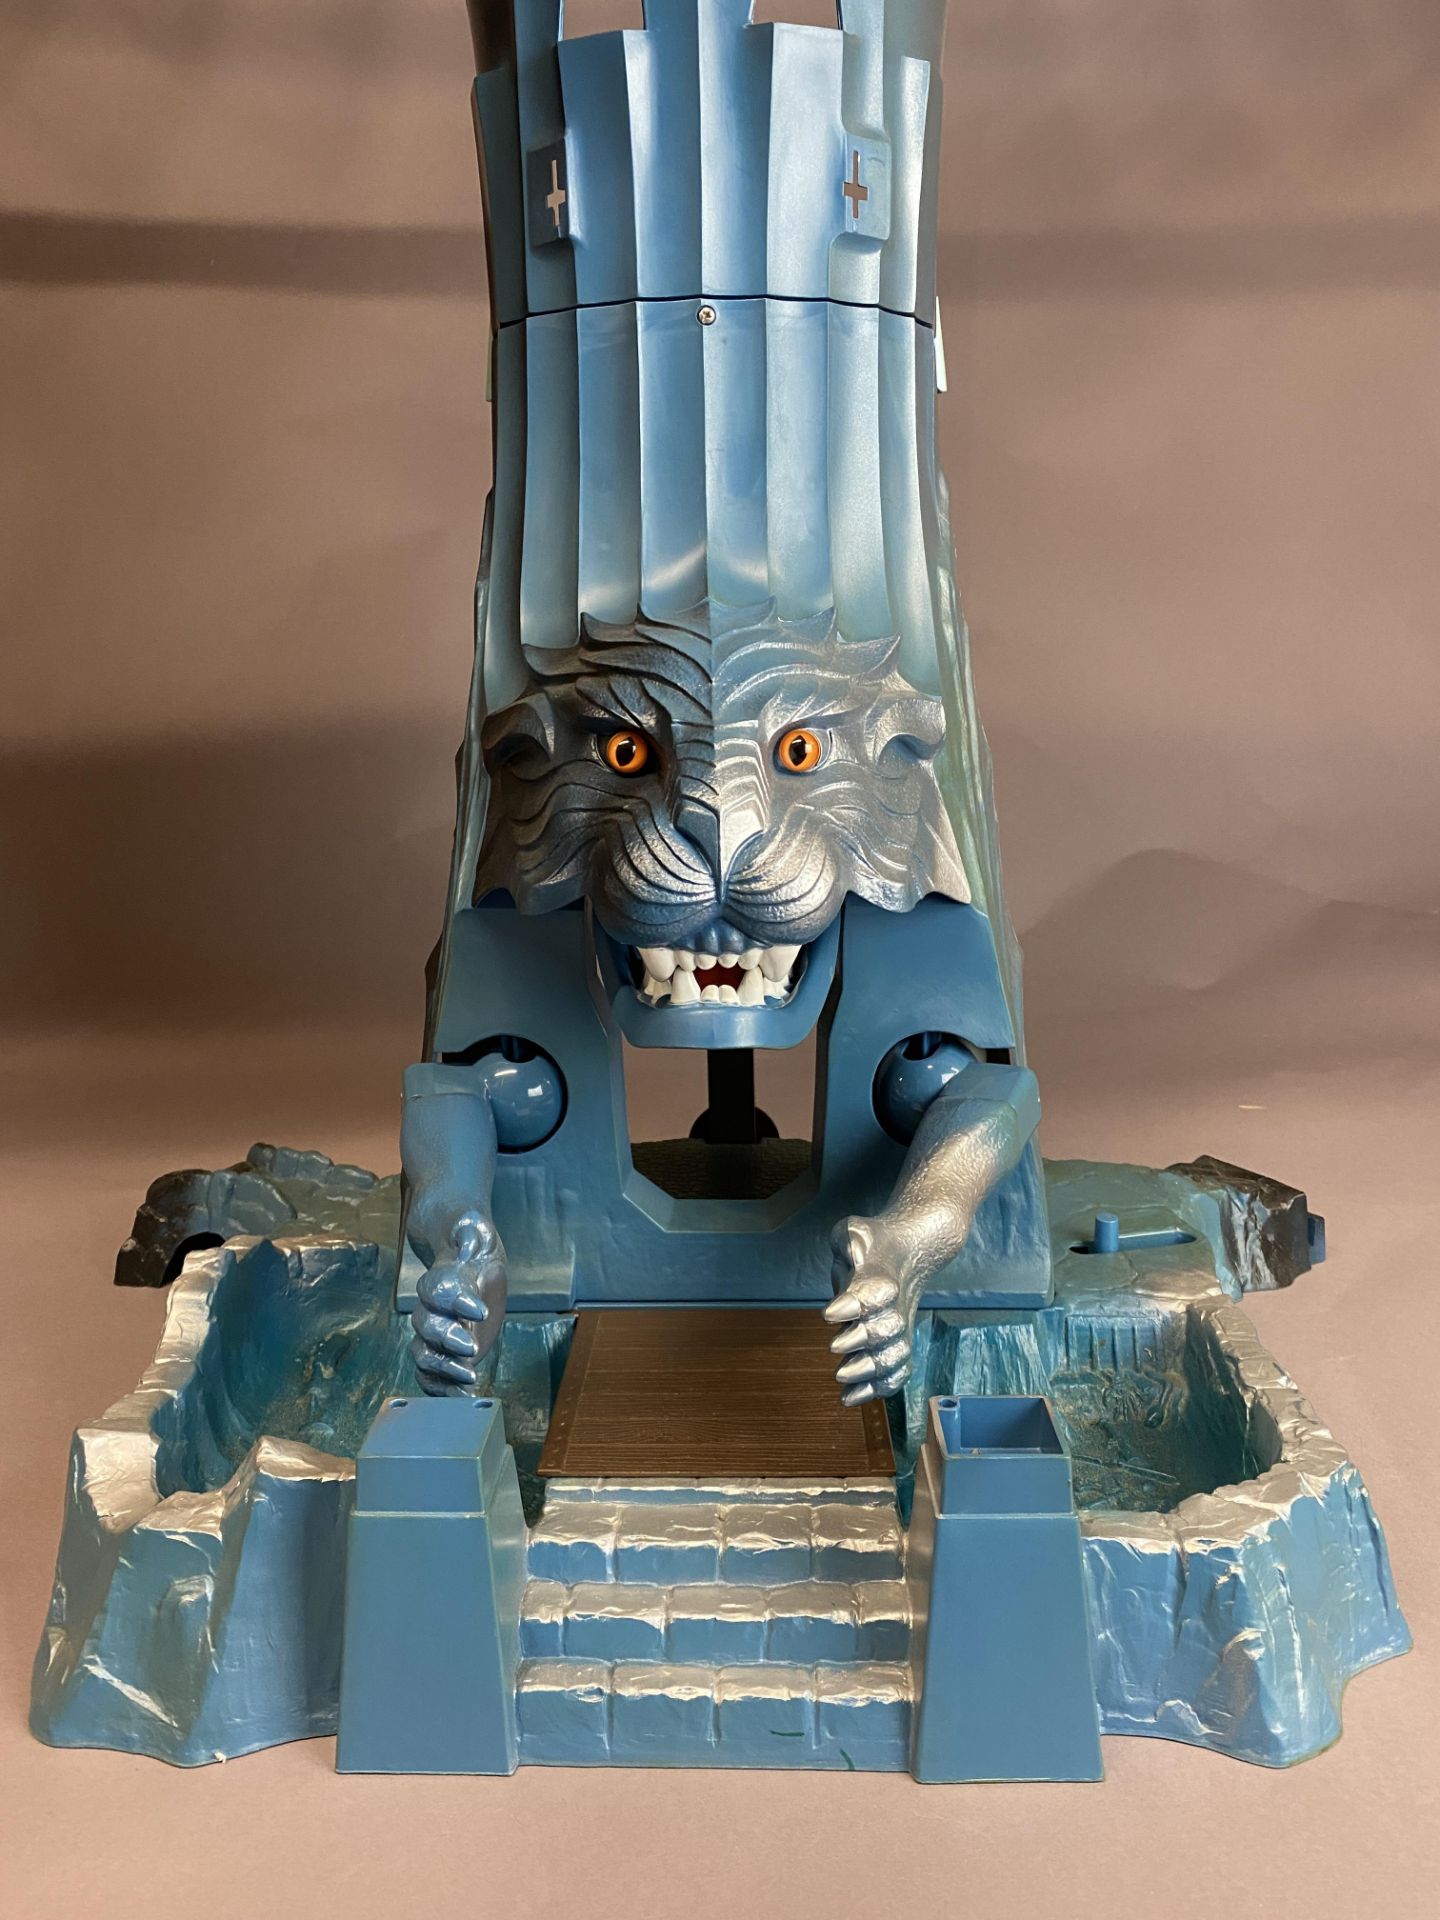 ETERNIA - Vintage Masters of the Universe Playset and Original Box (MOTU) - Appears to be complete - Image 95 of 125